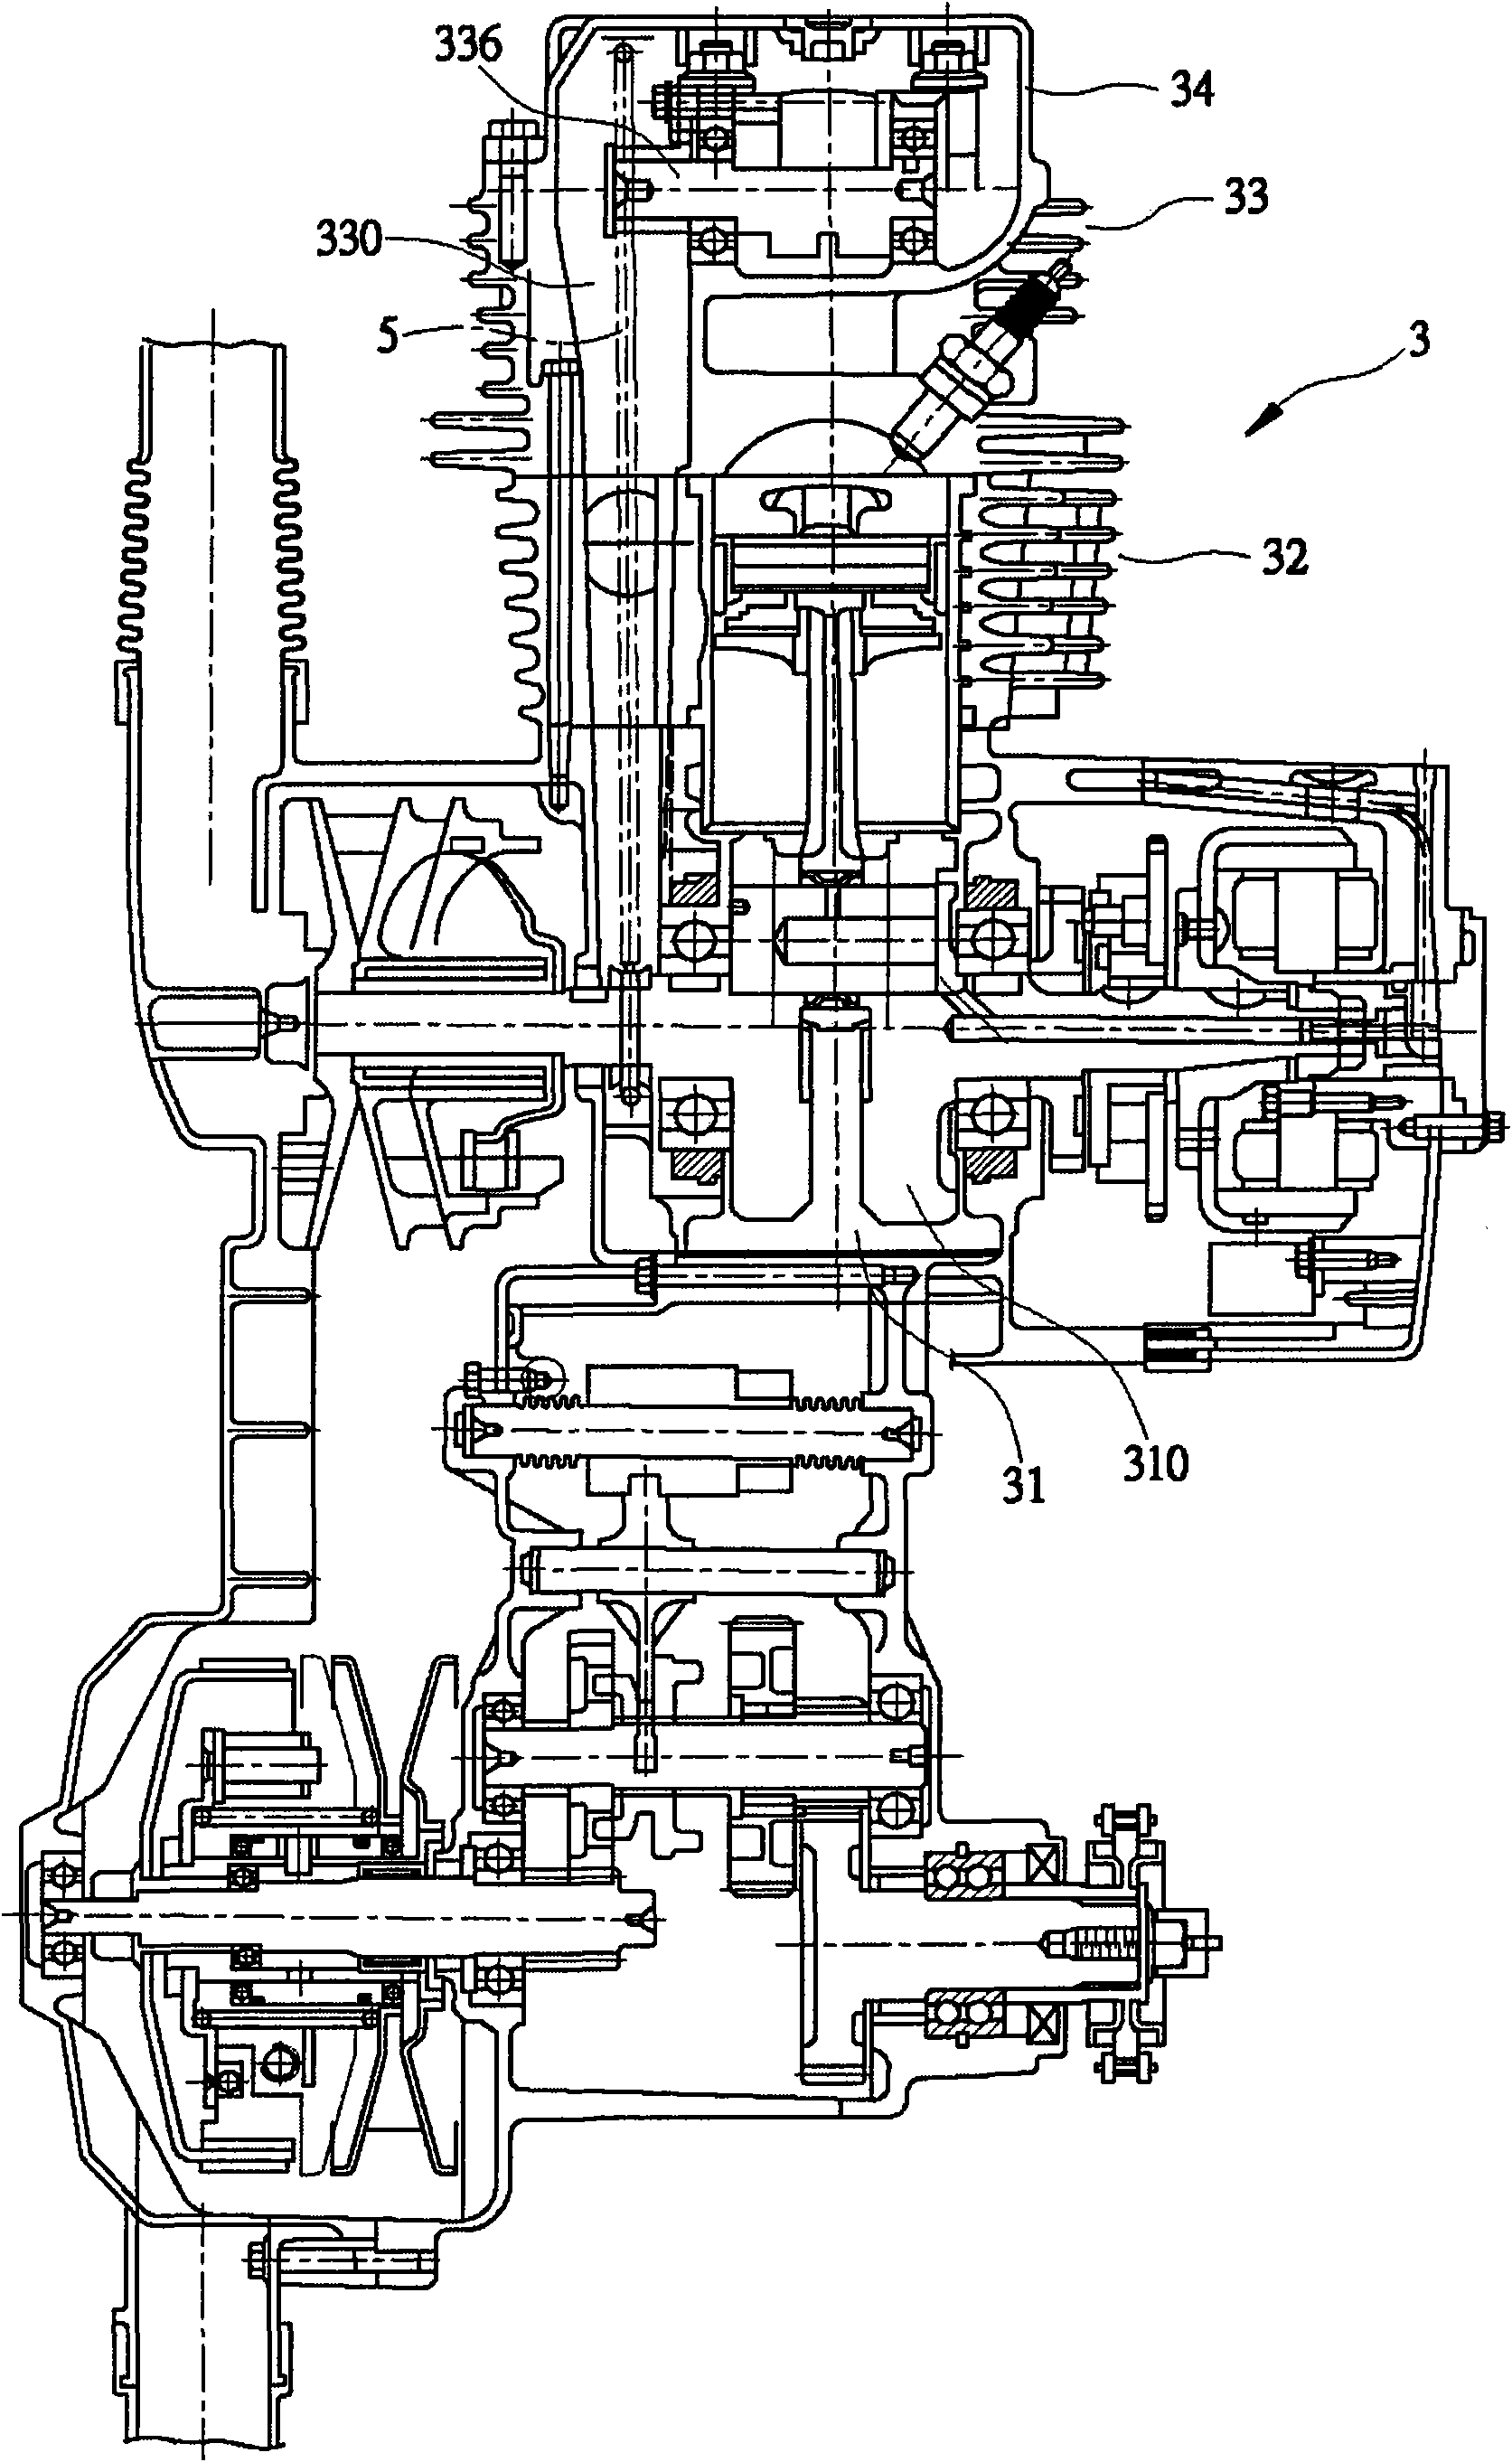 Configuration structure of variable valve lift mechanism and oil controlled valve of engine